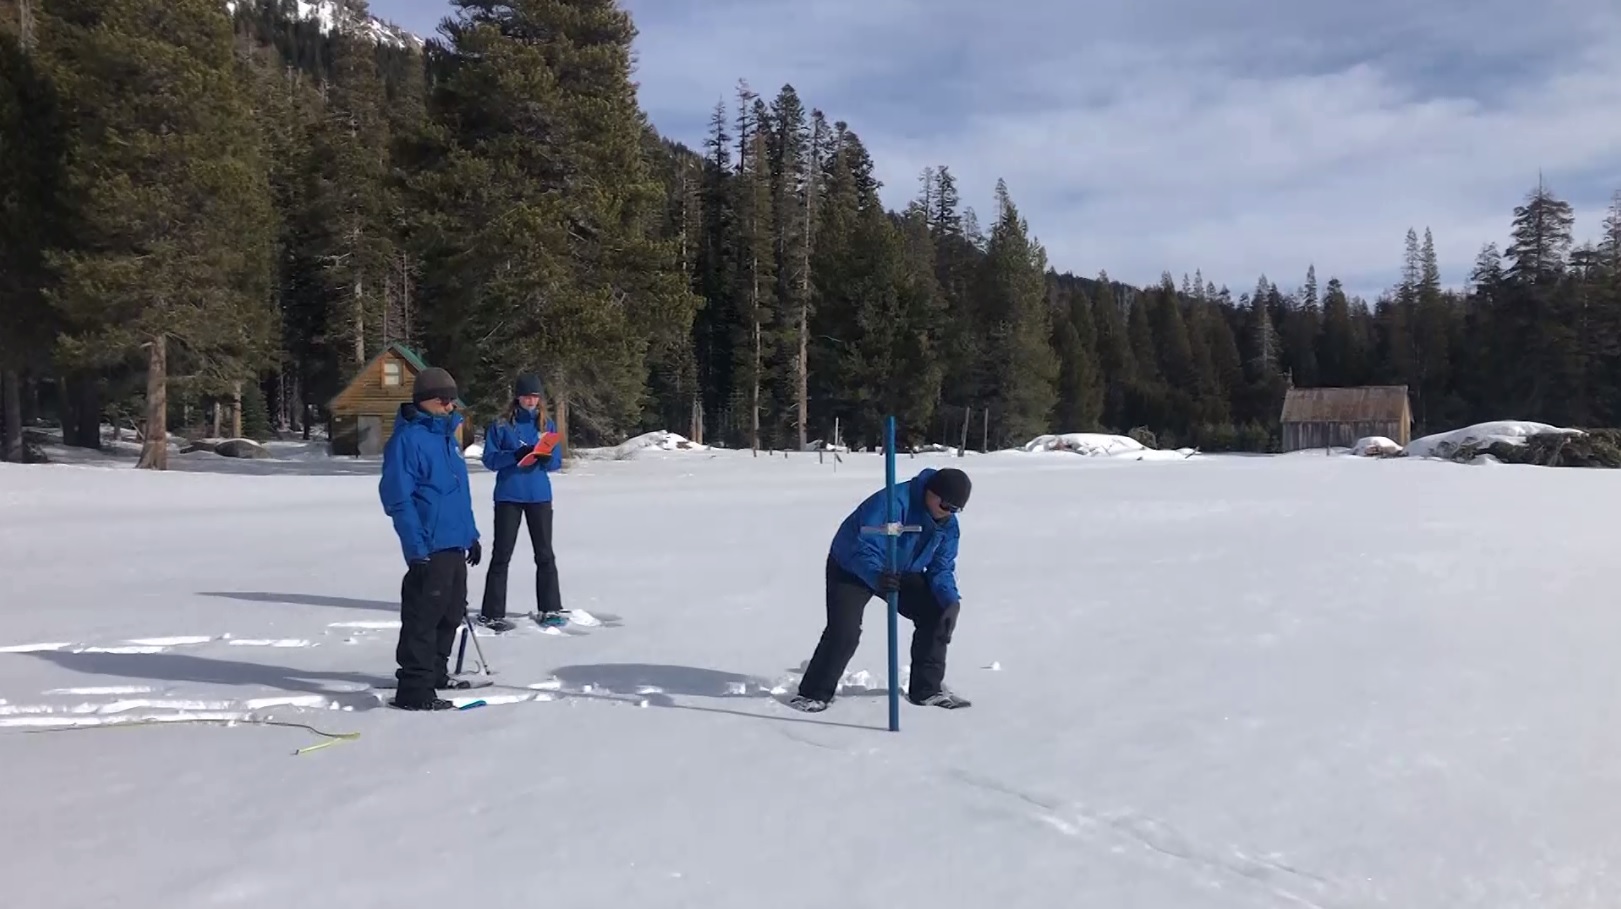 December Storms Give California A Promising Snowpack - CBS San Francisco